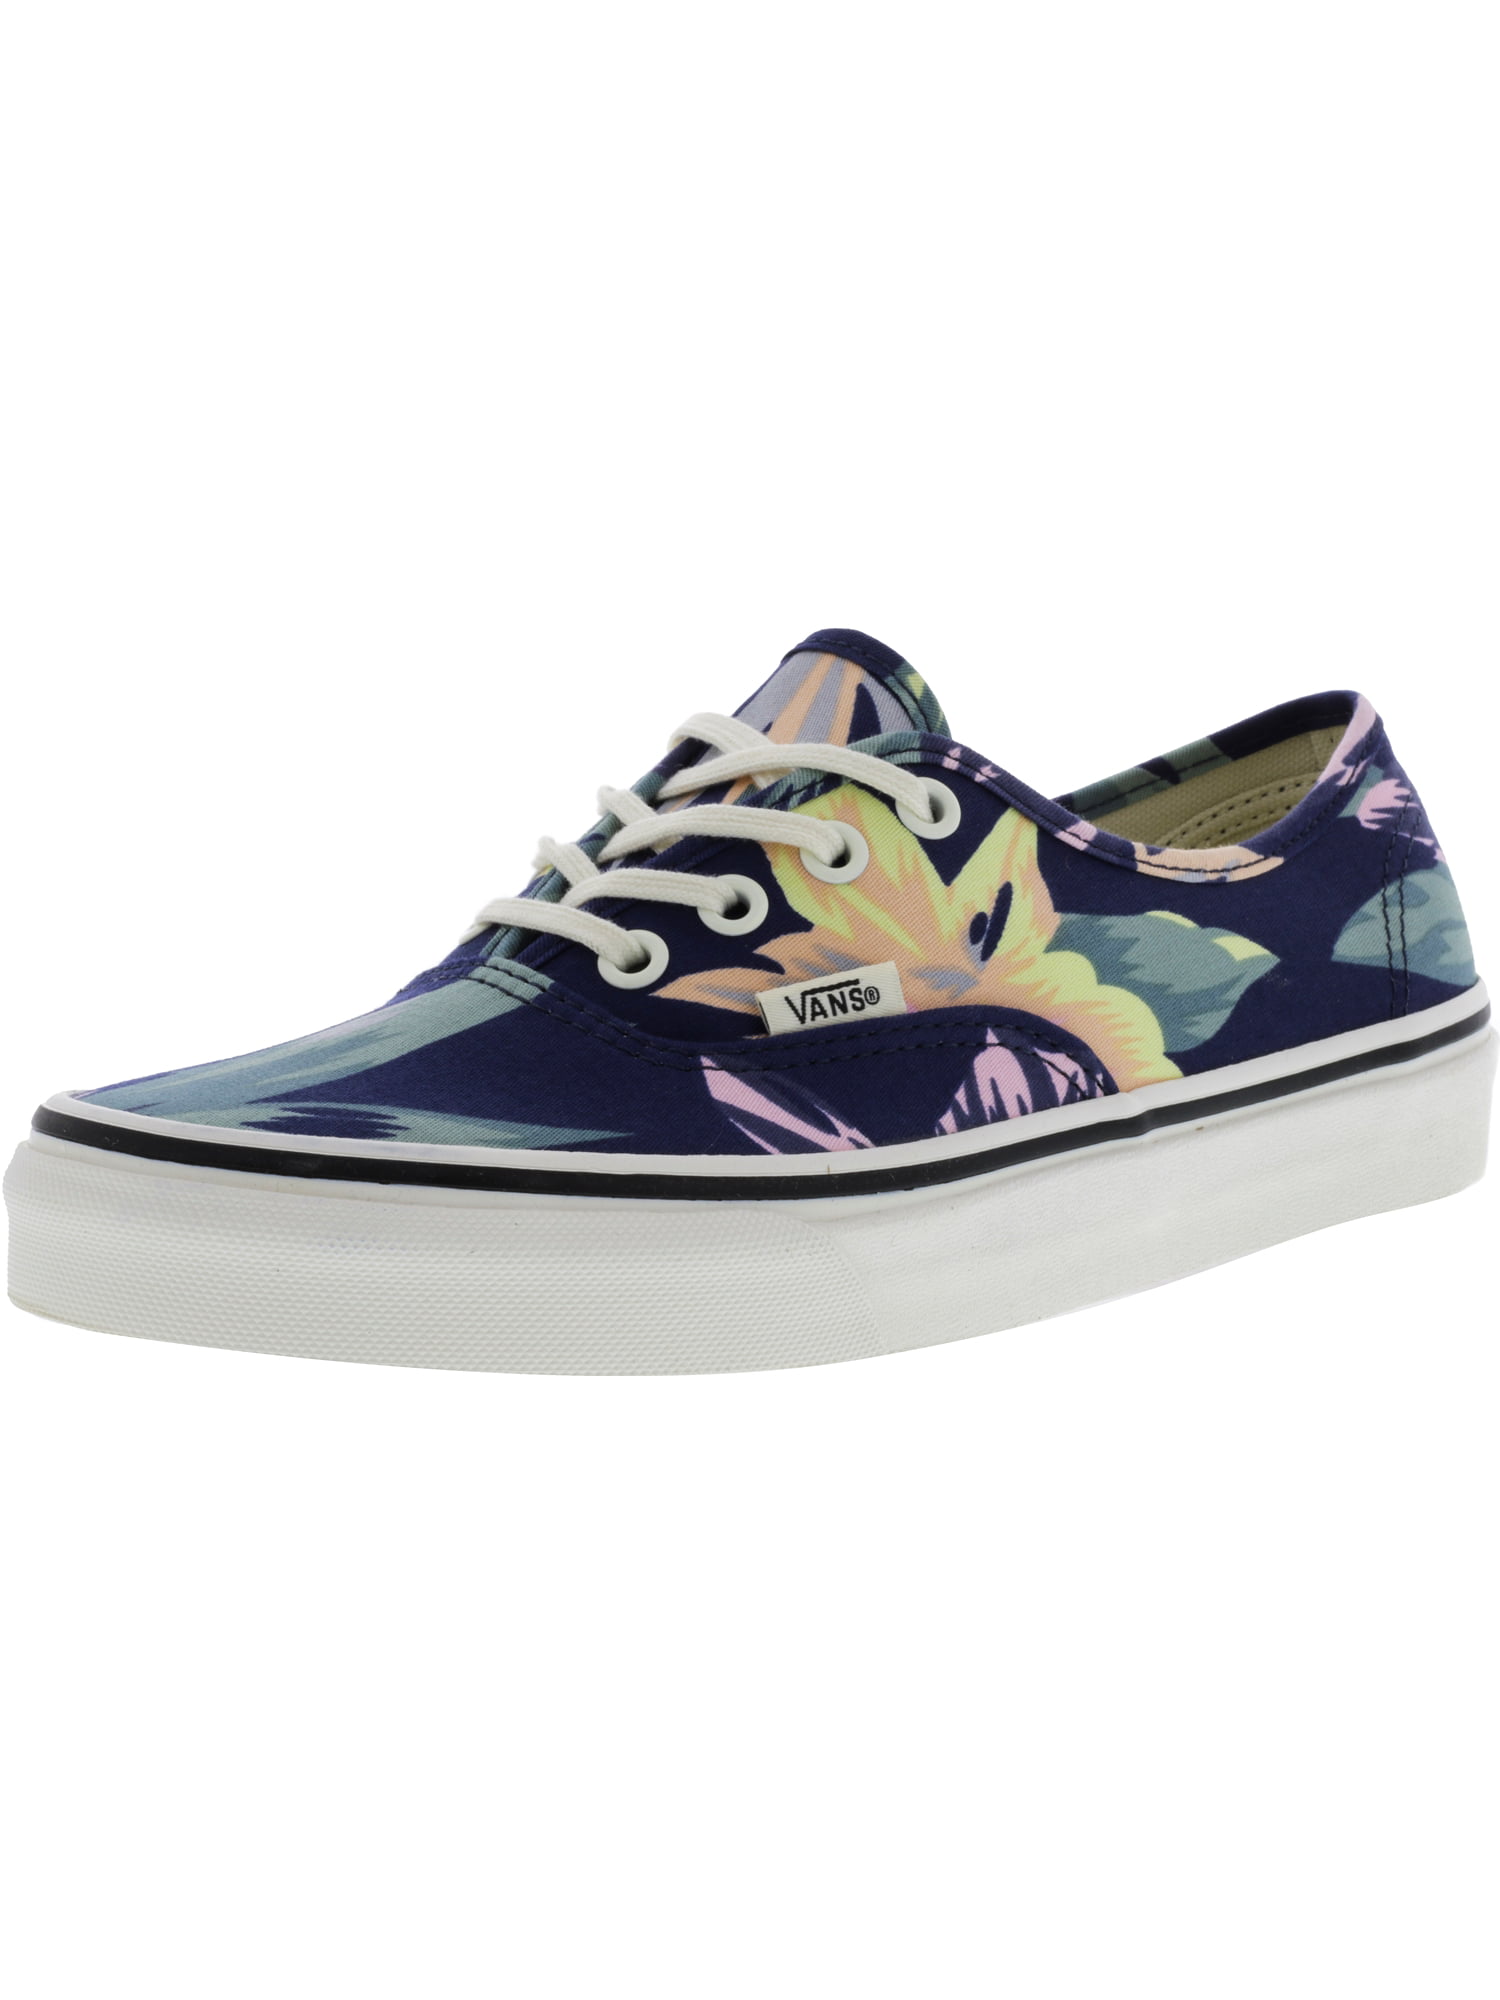 Vans Authentic Vintage Floral Navy / Marshmallow Ankle-High Canvas ...